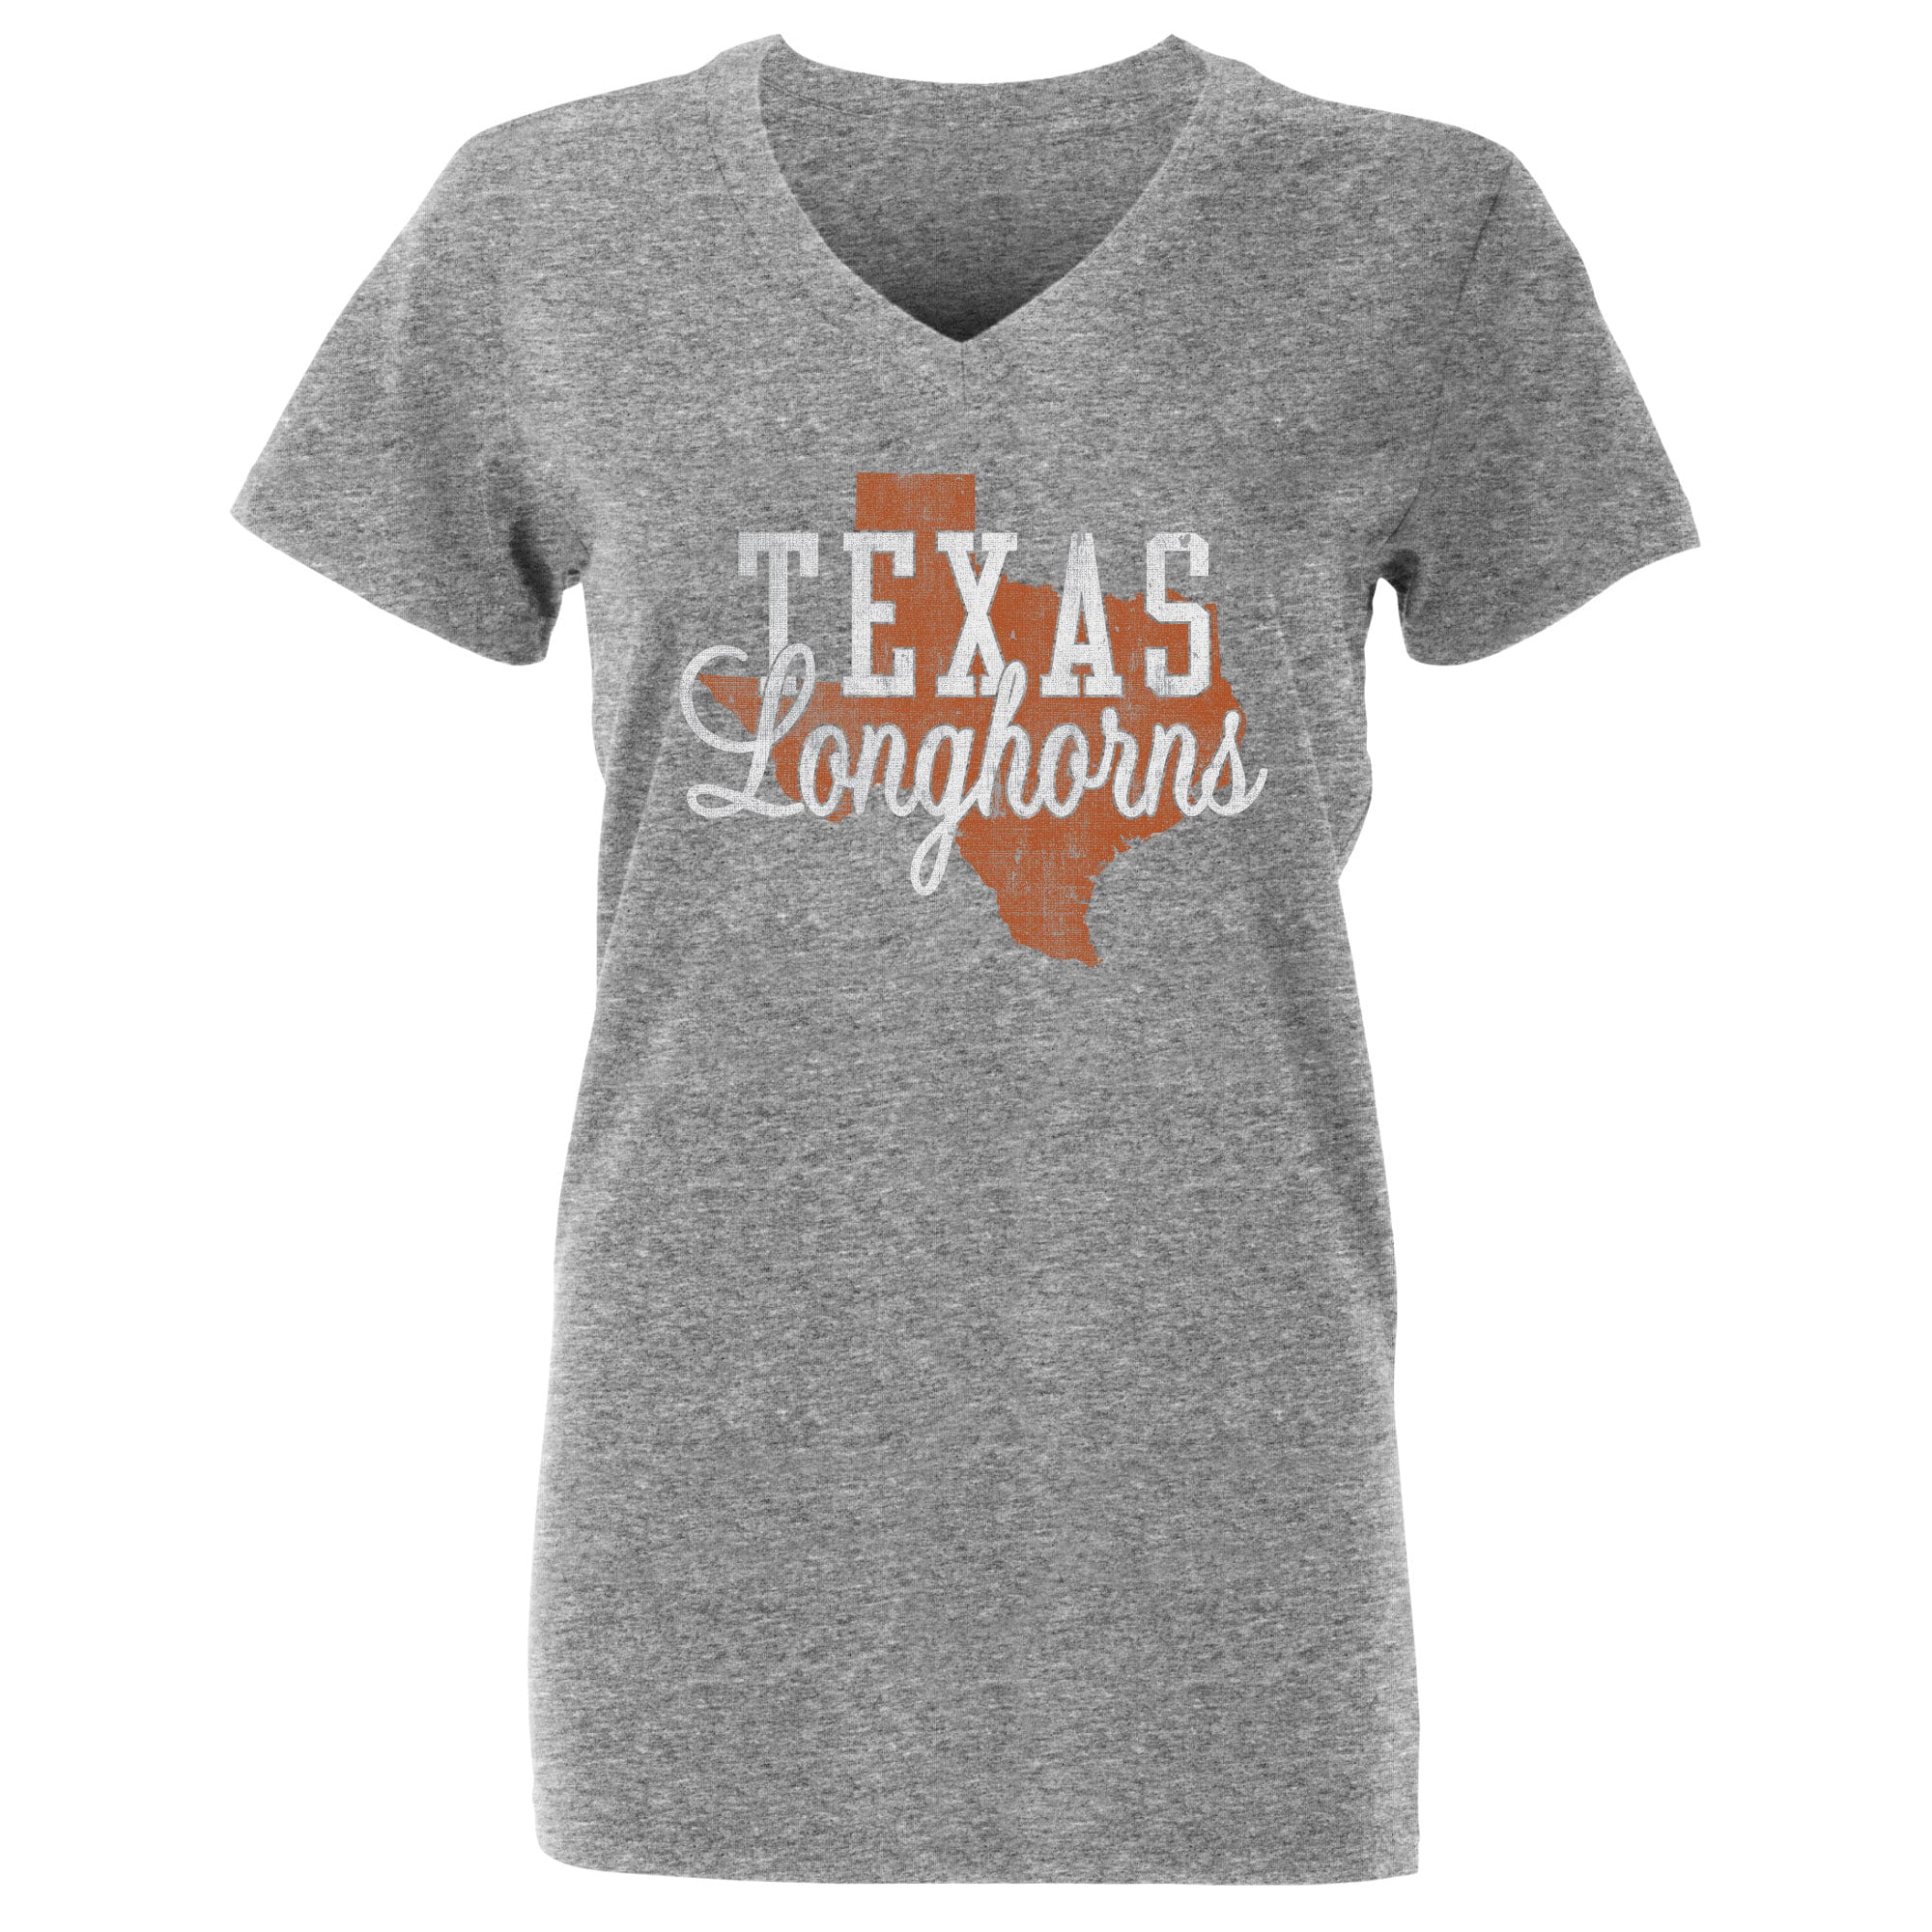 Tutus and Touchdowns with It's Longhorns Y'all Football Shirt Combo Kleding Jongenskleding Tops & T-shirts T-shirts 